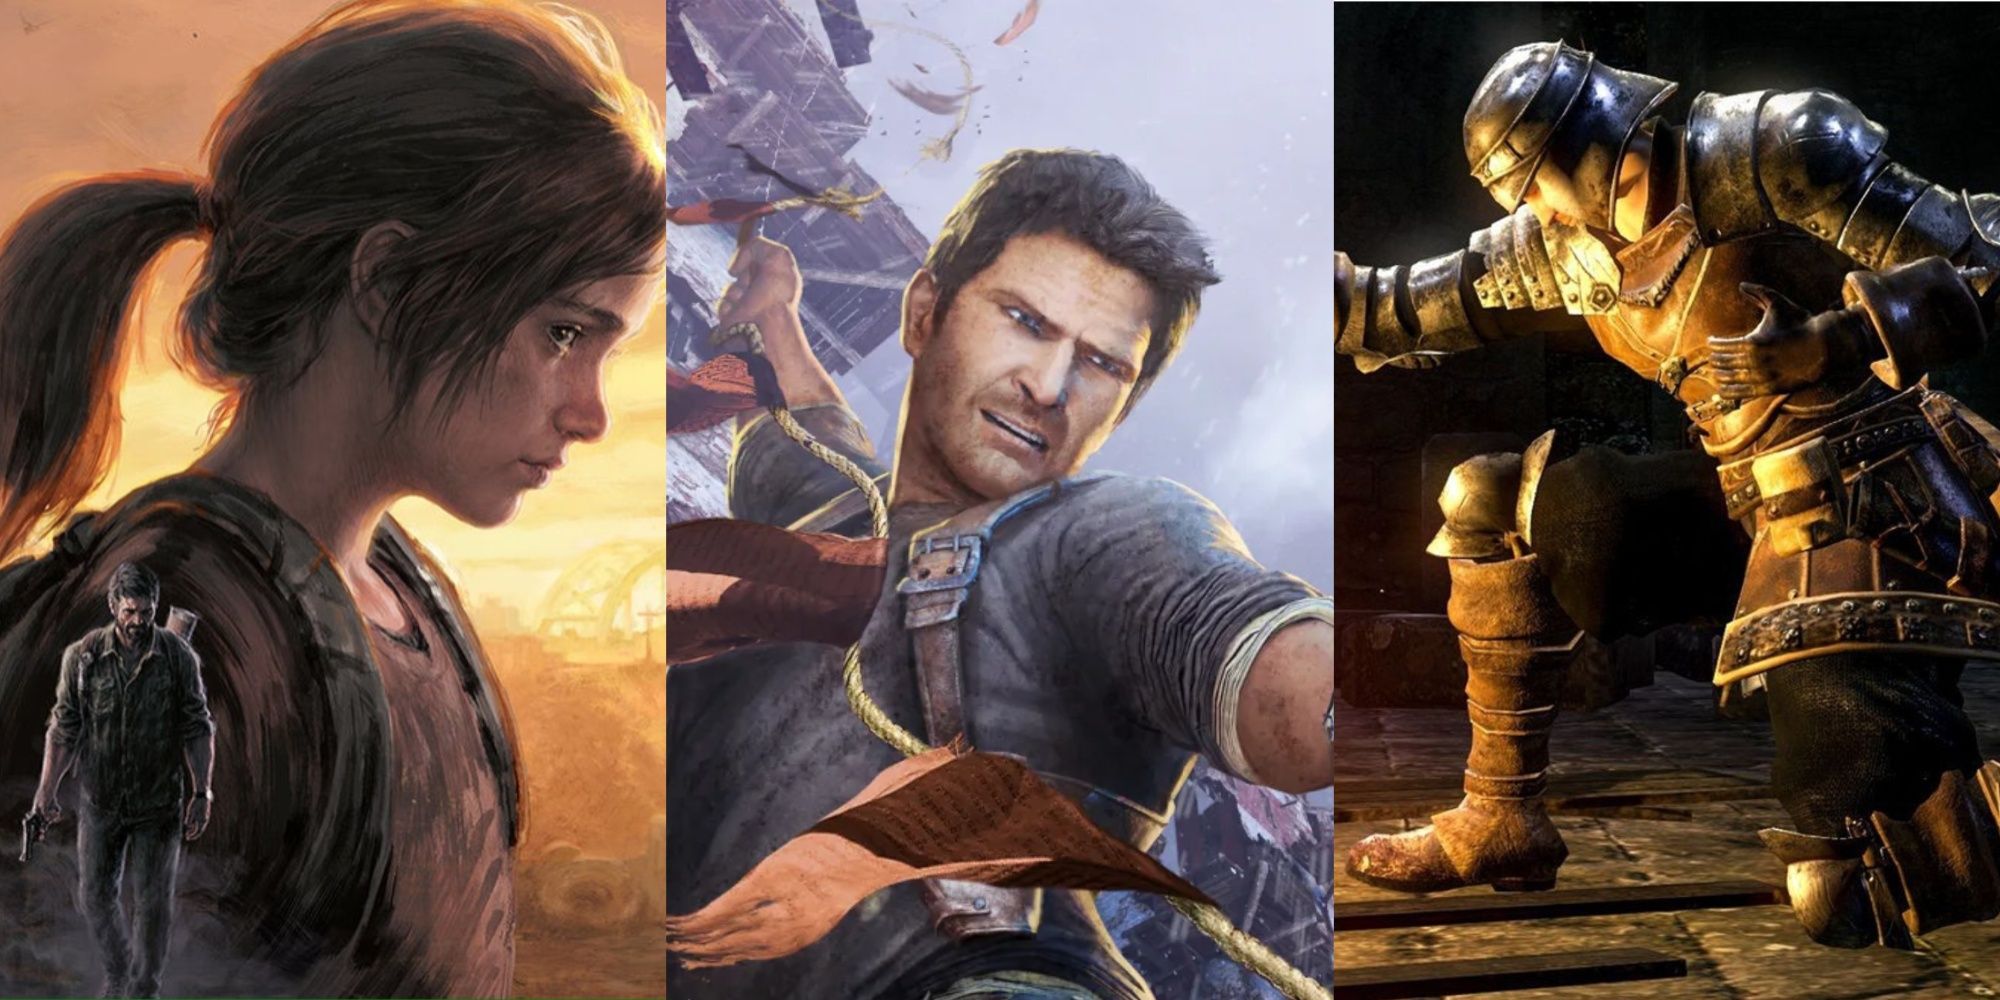 Ellie and Joel The Last Of Us, Nathan Drake hanging, and a knight from Dark Souls